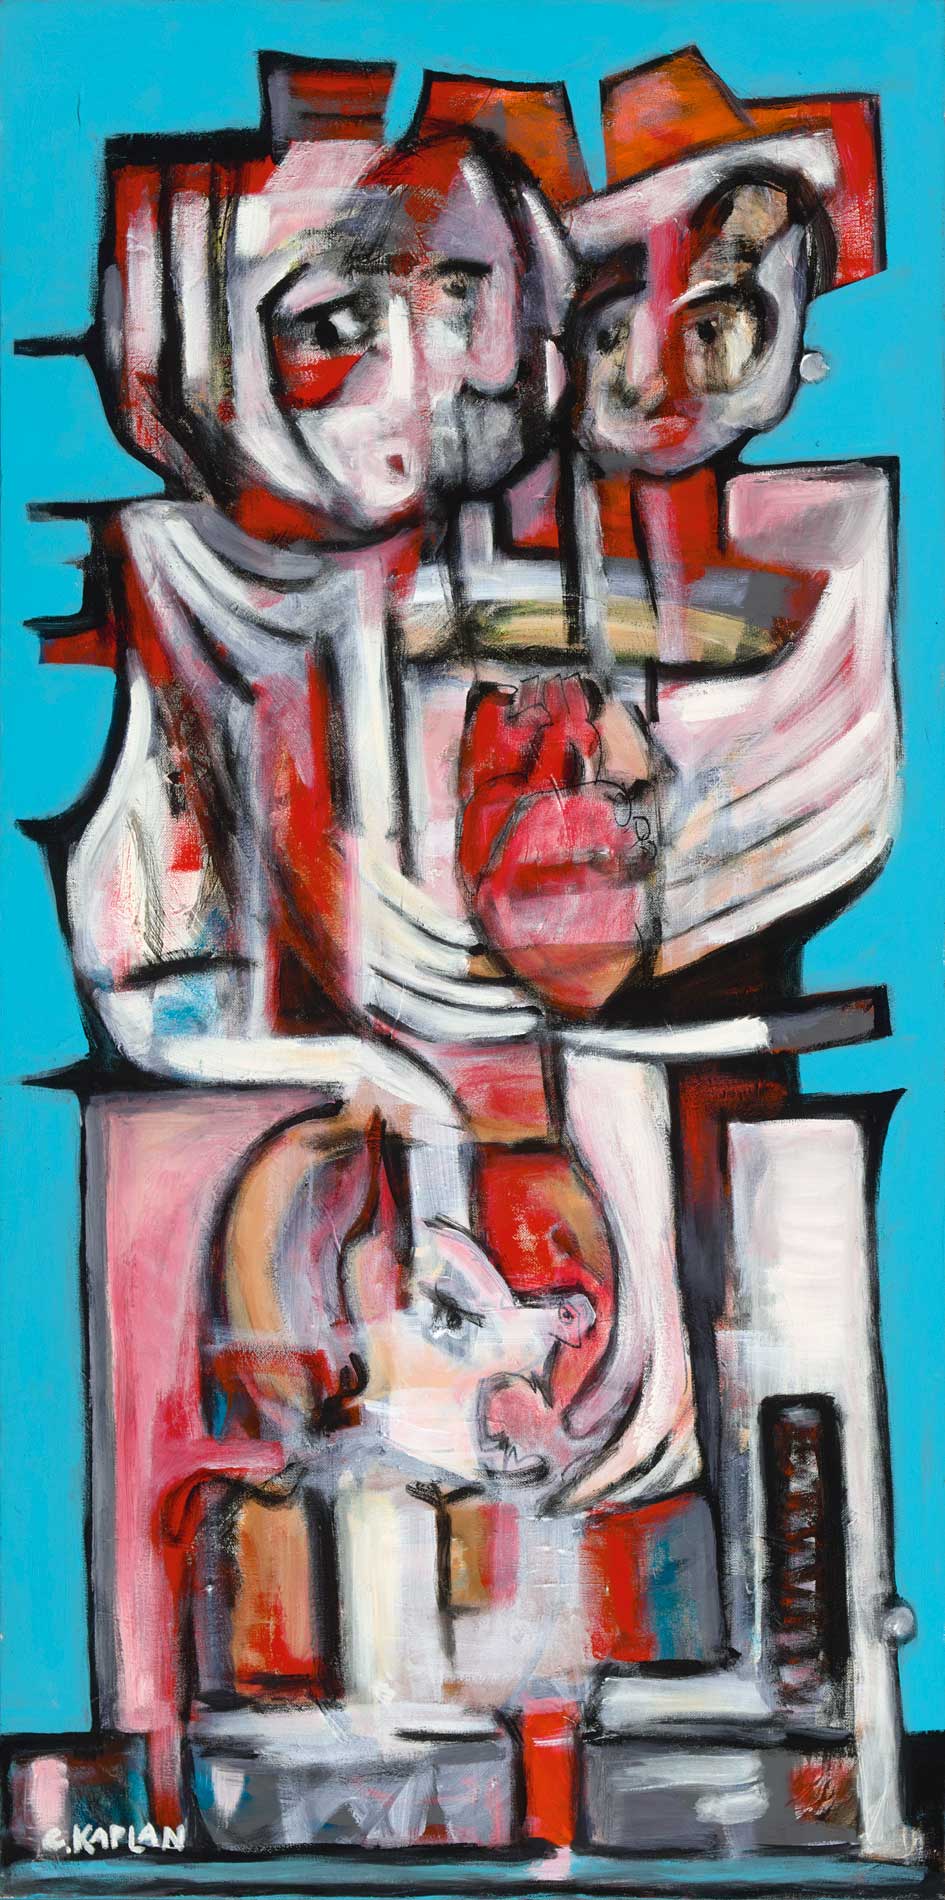 Here you Deal With It Said The Hear To The Highr Mind Acrylic On Canvas 24" X 48"